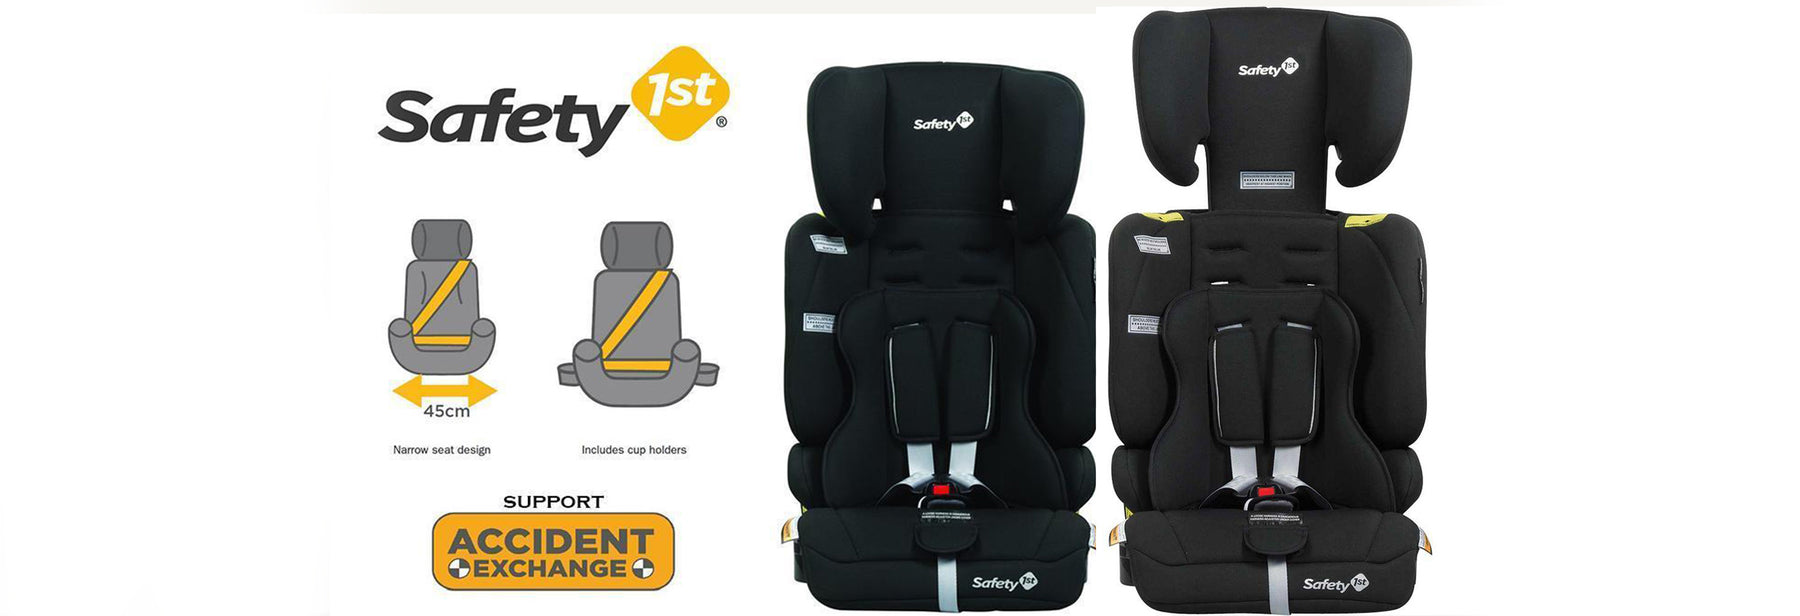 Super Narrow yet super comfortable. Check out the Safety 1st Solo Convertible Booster Seat